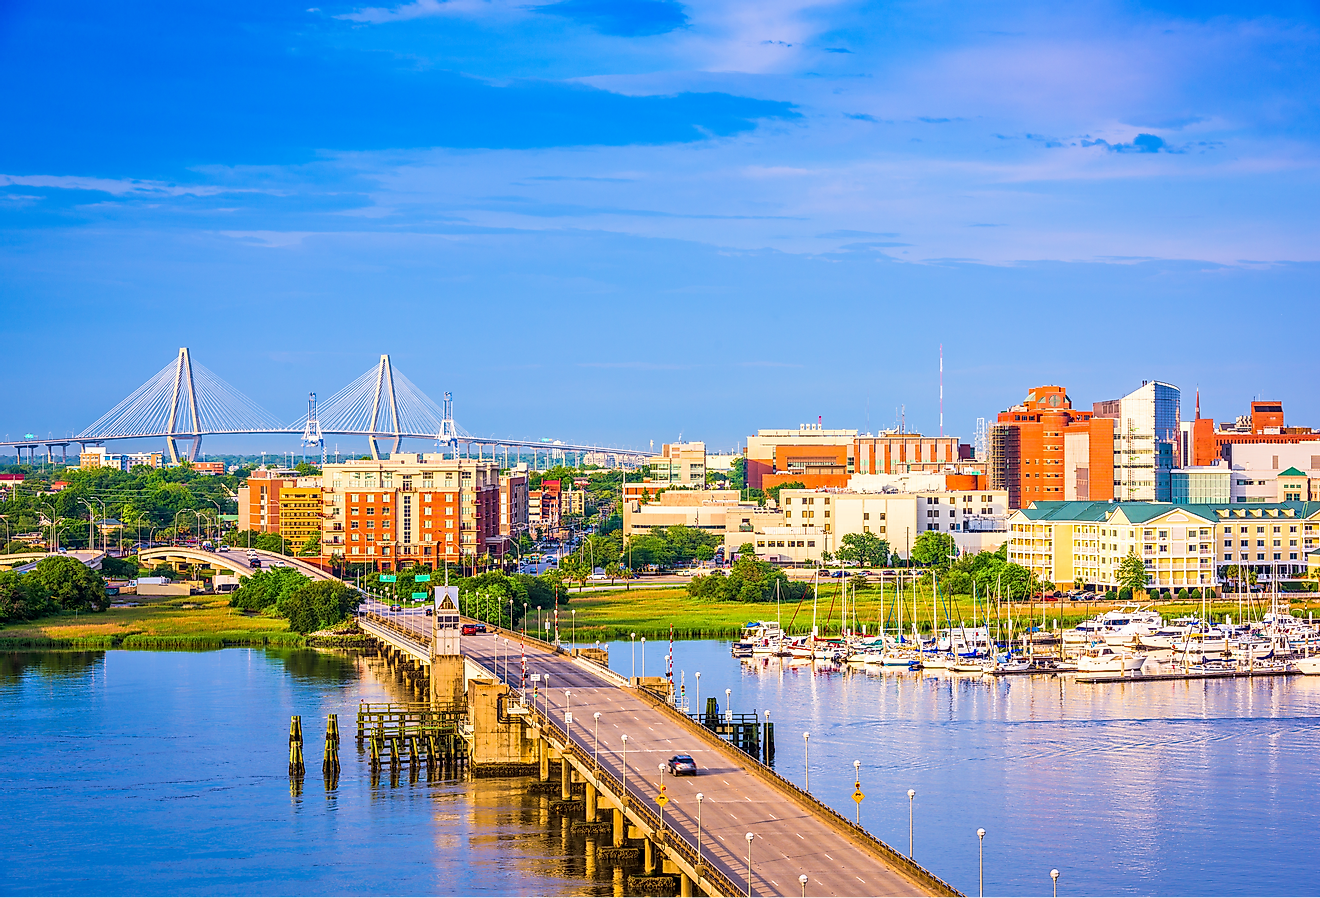 Road over the water by the harbor in Charleston, South Carolina.